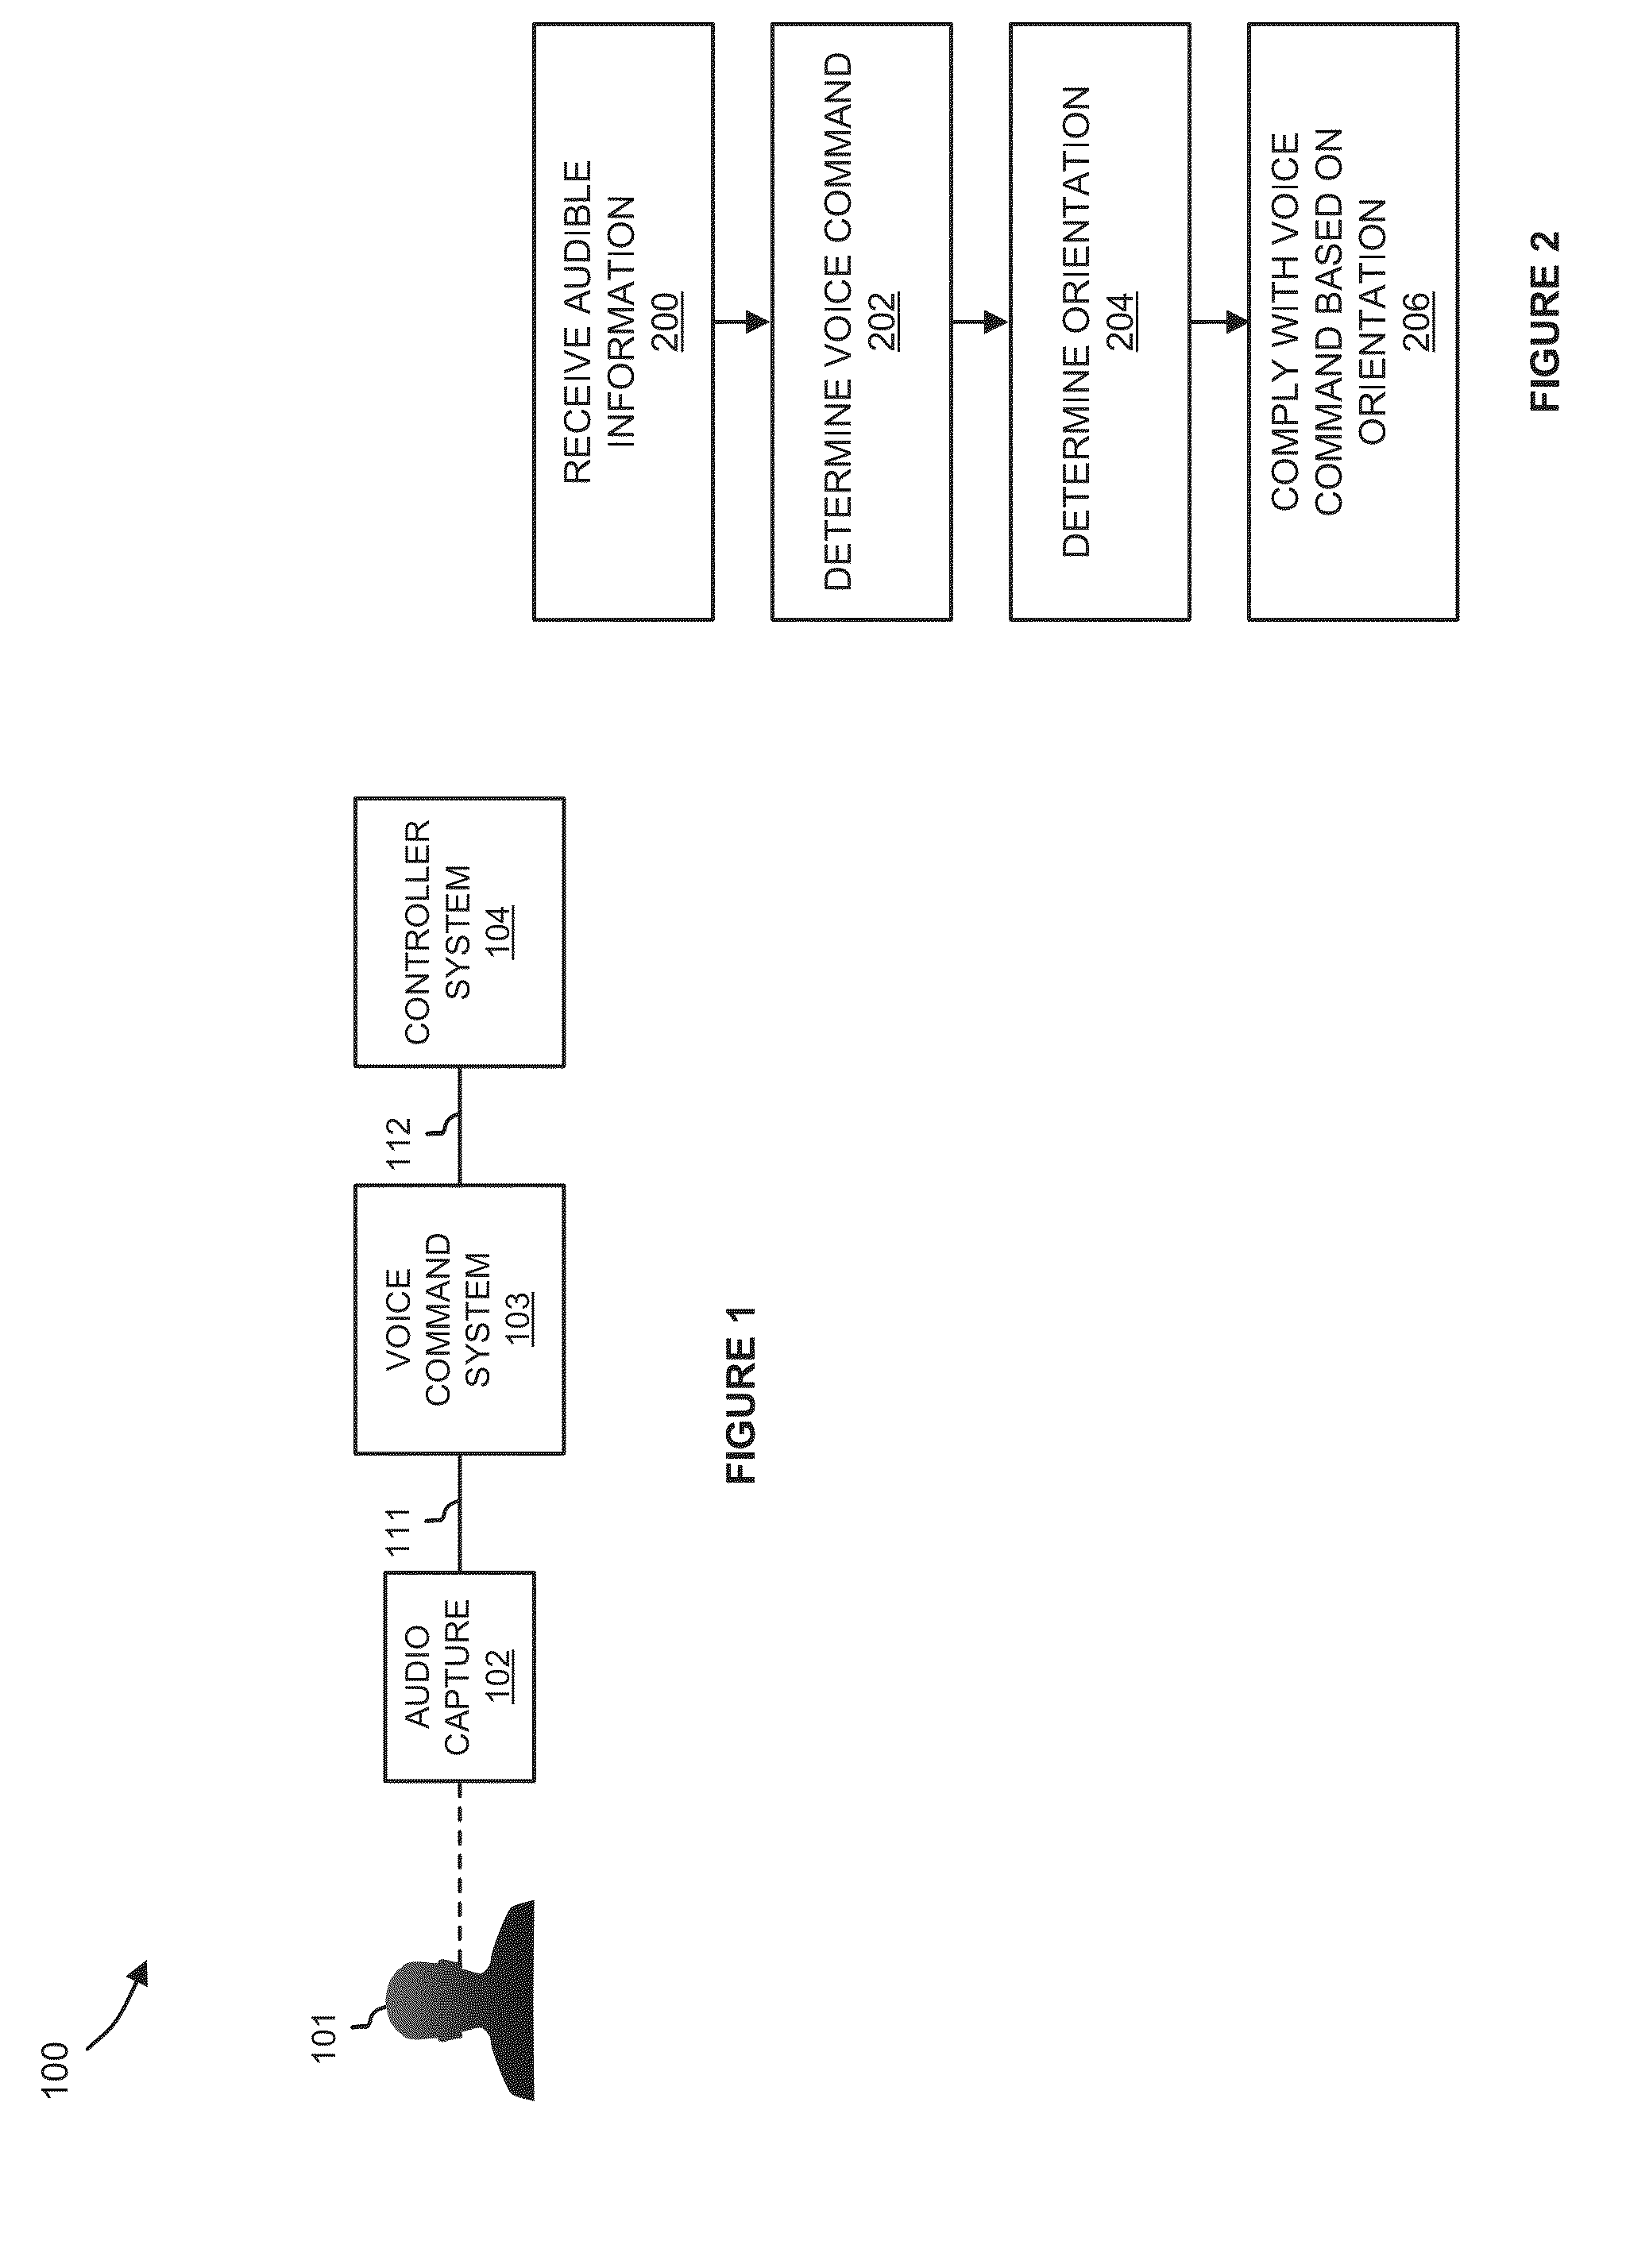 Integration of user orientation into a voice command system